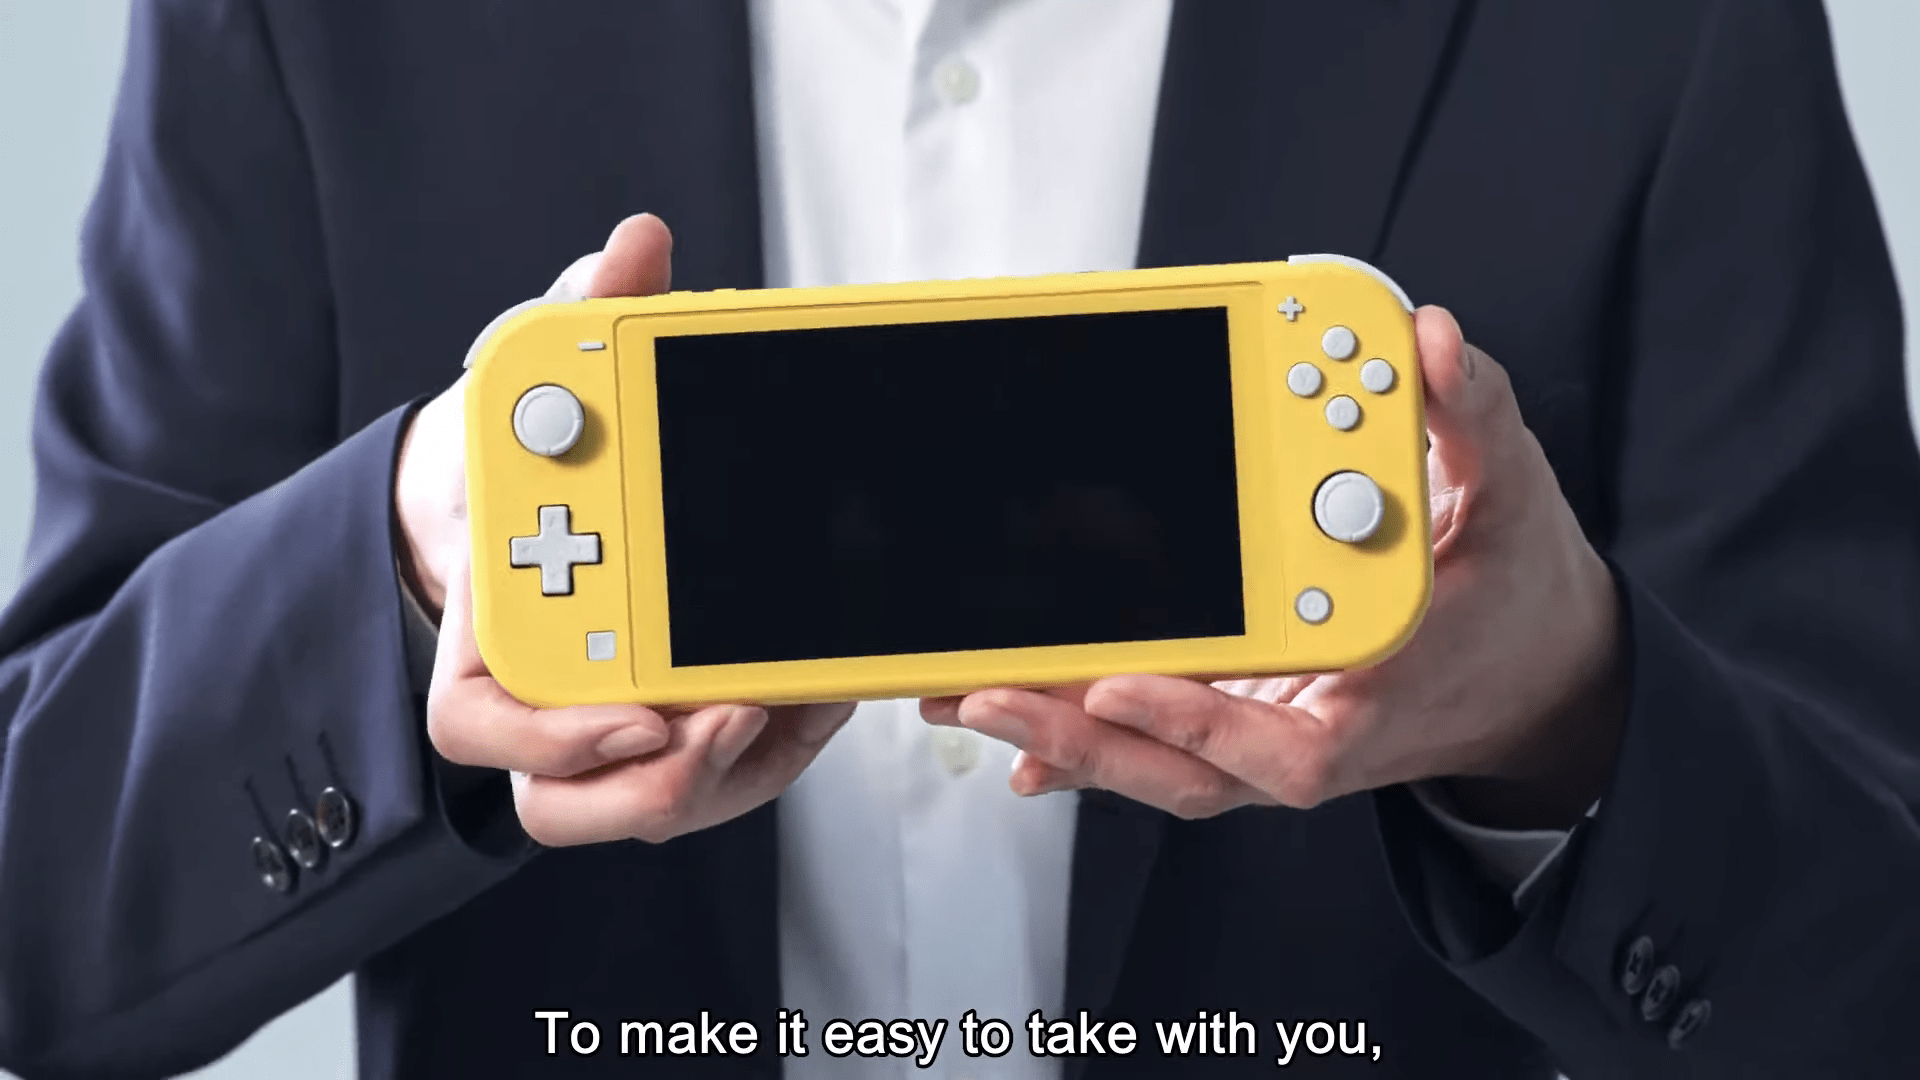 Some Nintendo Games Will Be Affected By The Nintendo Switch Lite Feature Changes